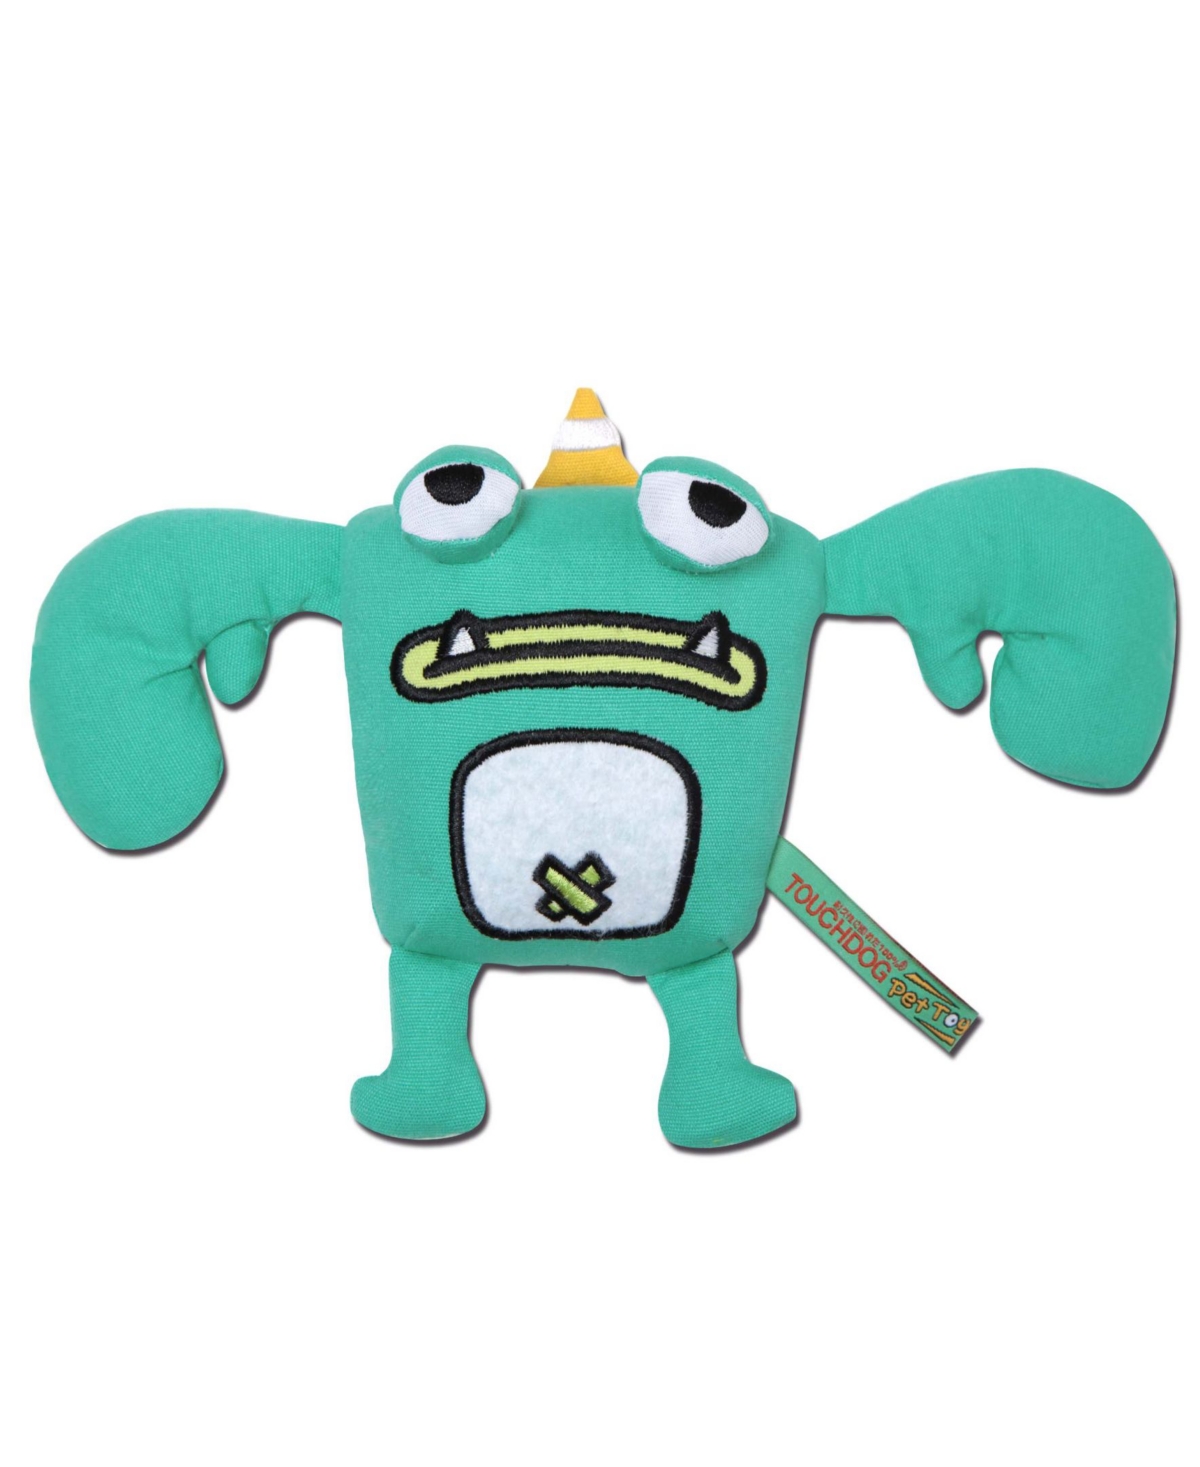 Cartoon Crabby Tooth Monster Plush Dog Toy - Green